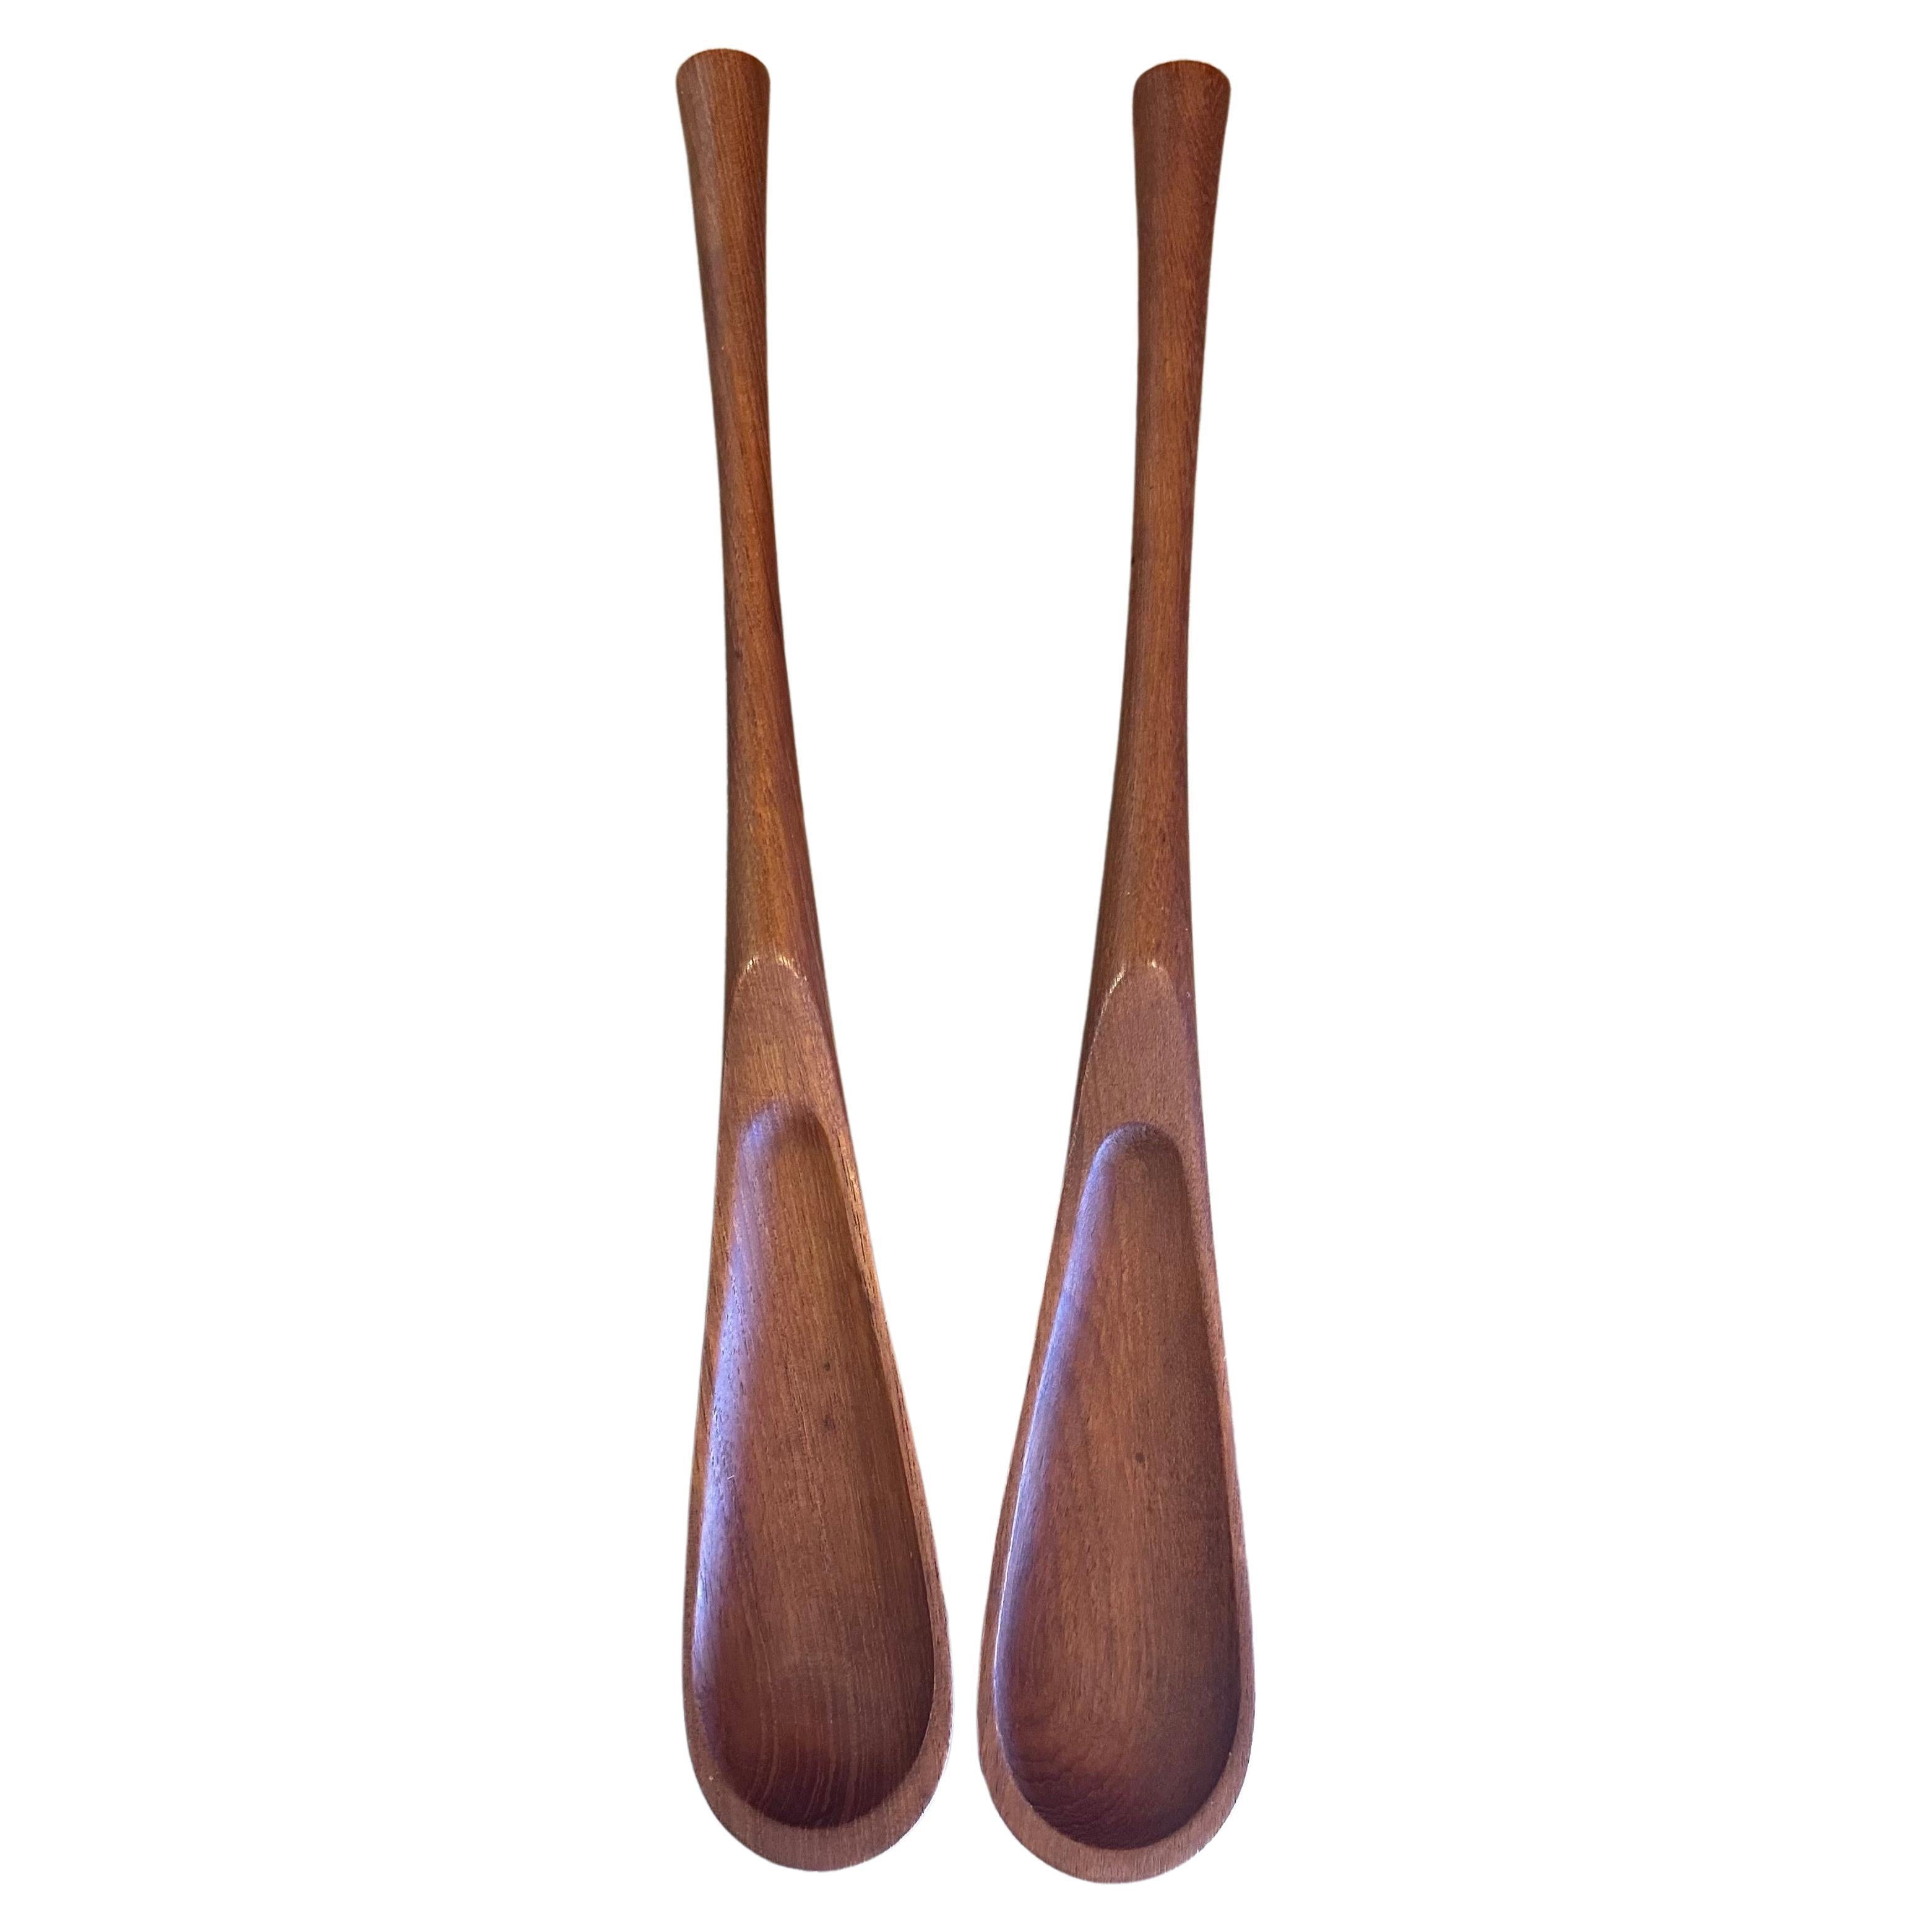 Rare pair of solid teak salad servers by Jens Quistgaard for Dansk, circa 1950s.  The set is in very good vintage condition and measures 2.25